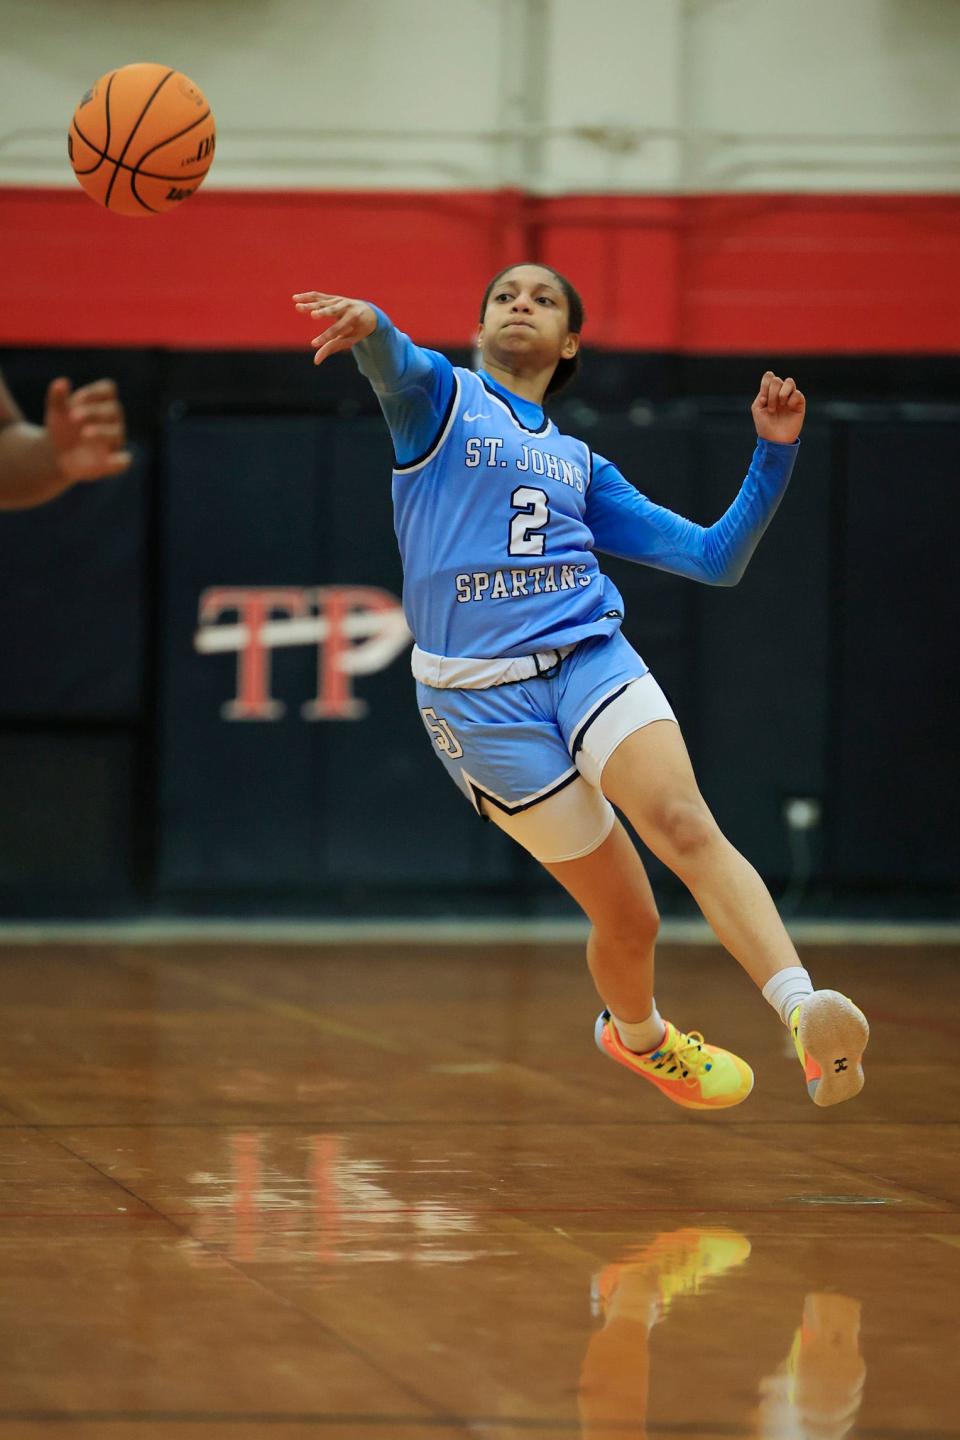 St. Johns Country Day's Taliah Scott broke multiple tournament records while leading the Spartans to the championship at the Chick-fil-A Basketball Classic in Bradenton.